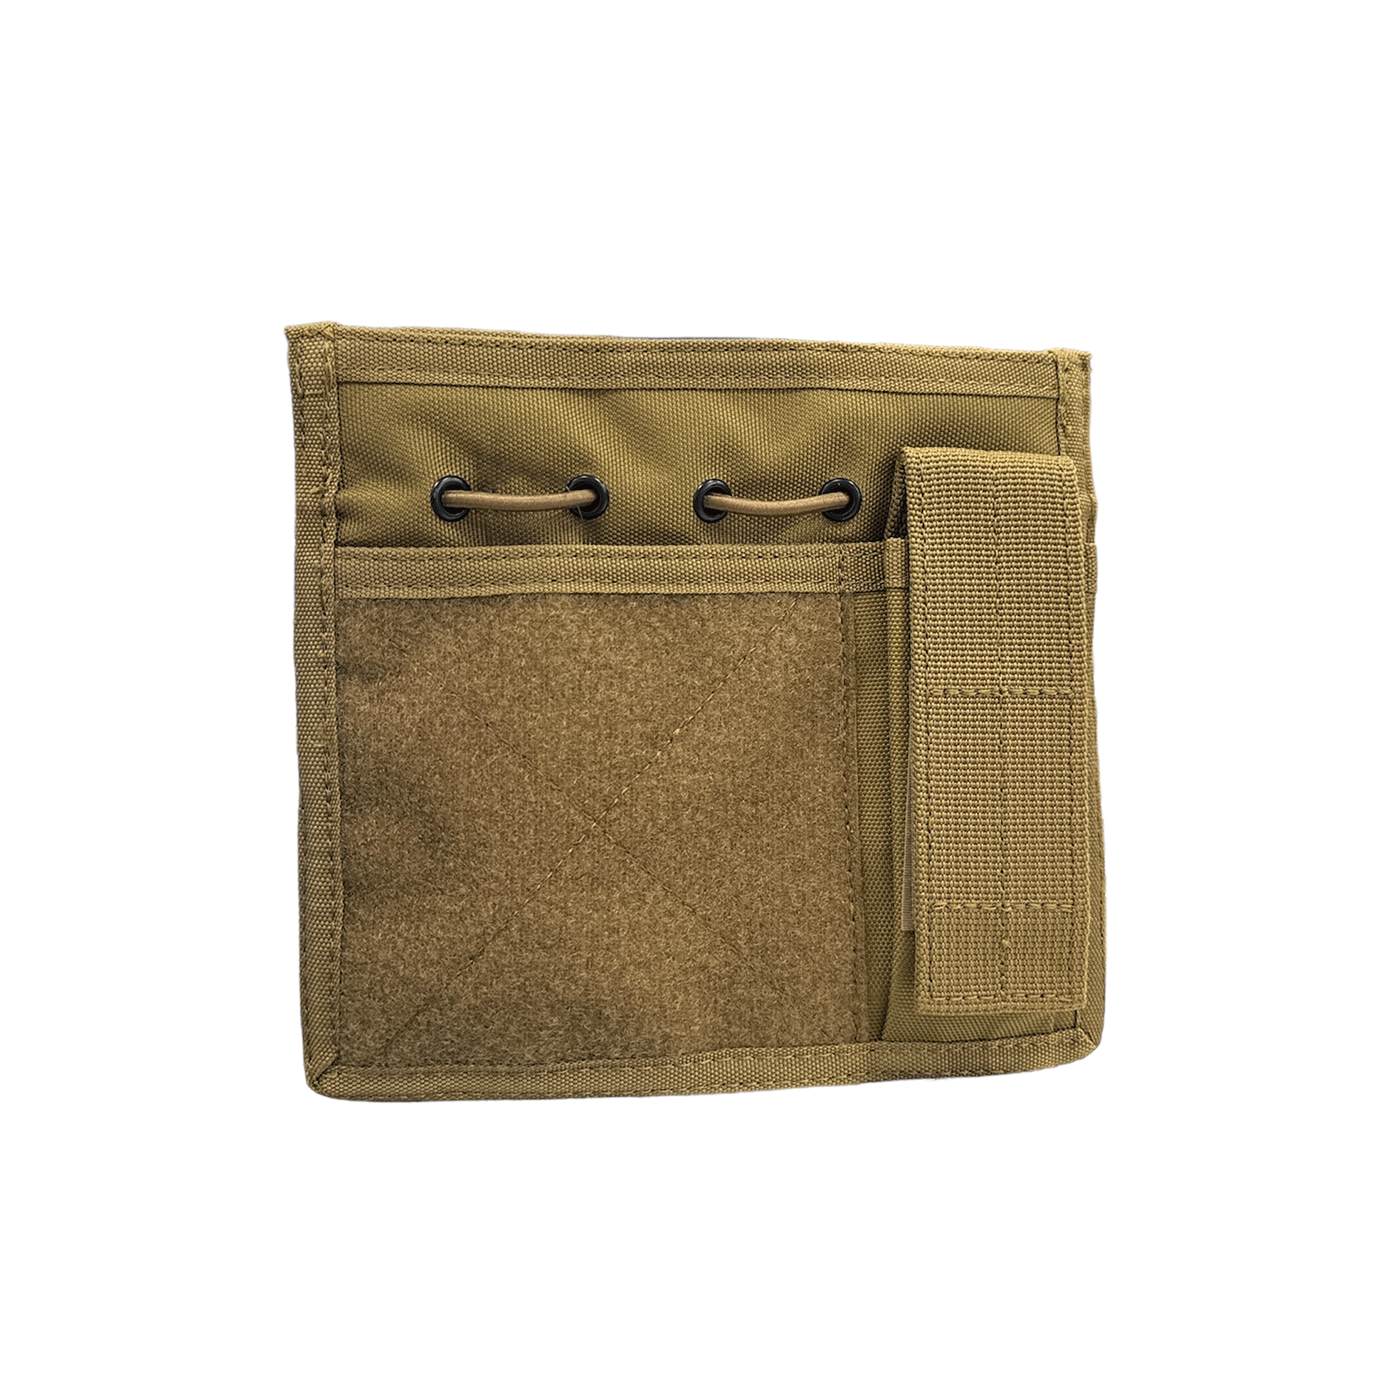 NERG OPENLAND - DOCUMENT POCKET Coyote Tan